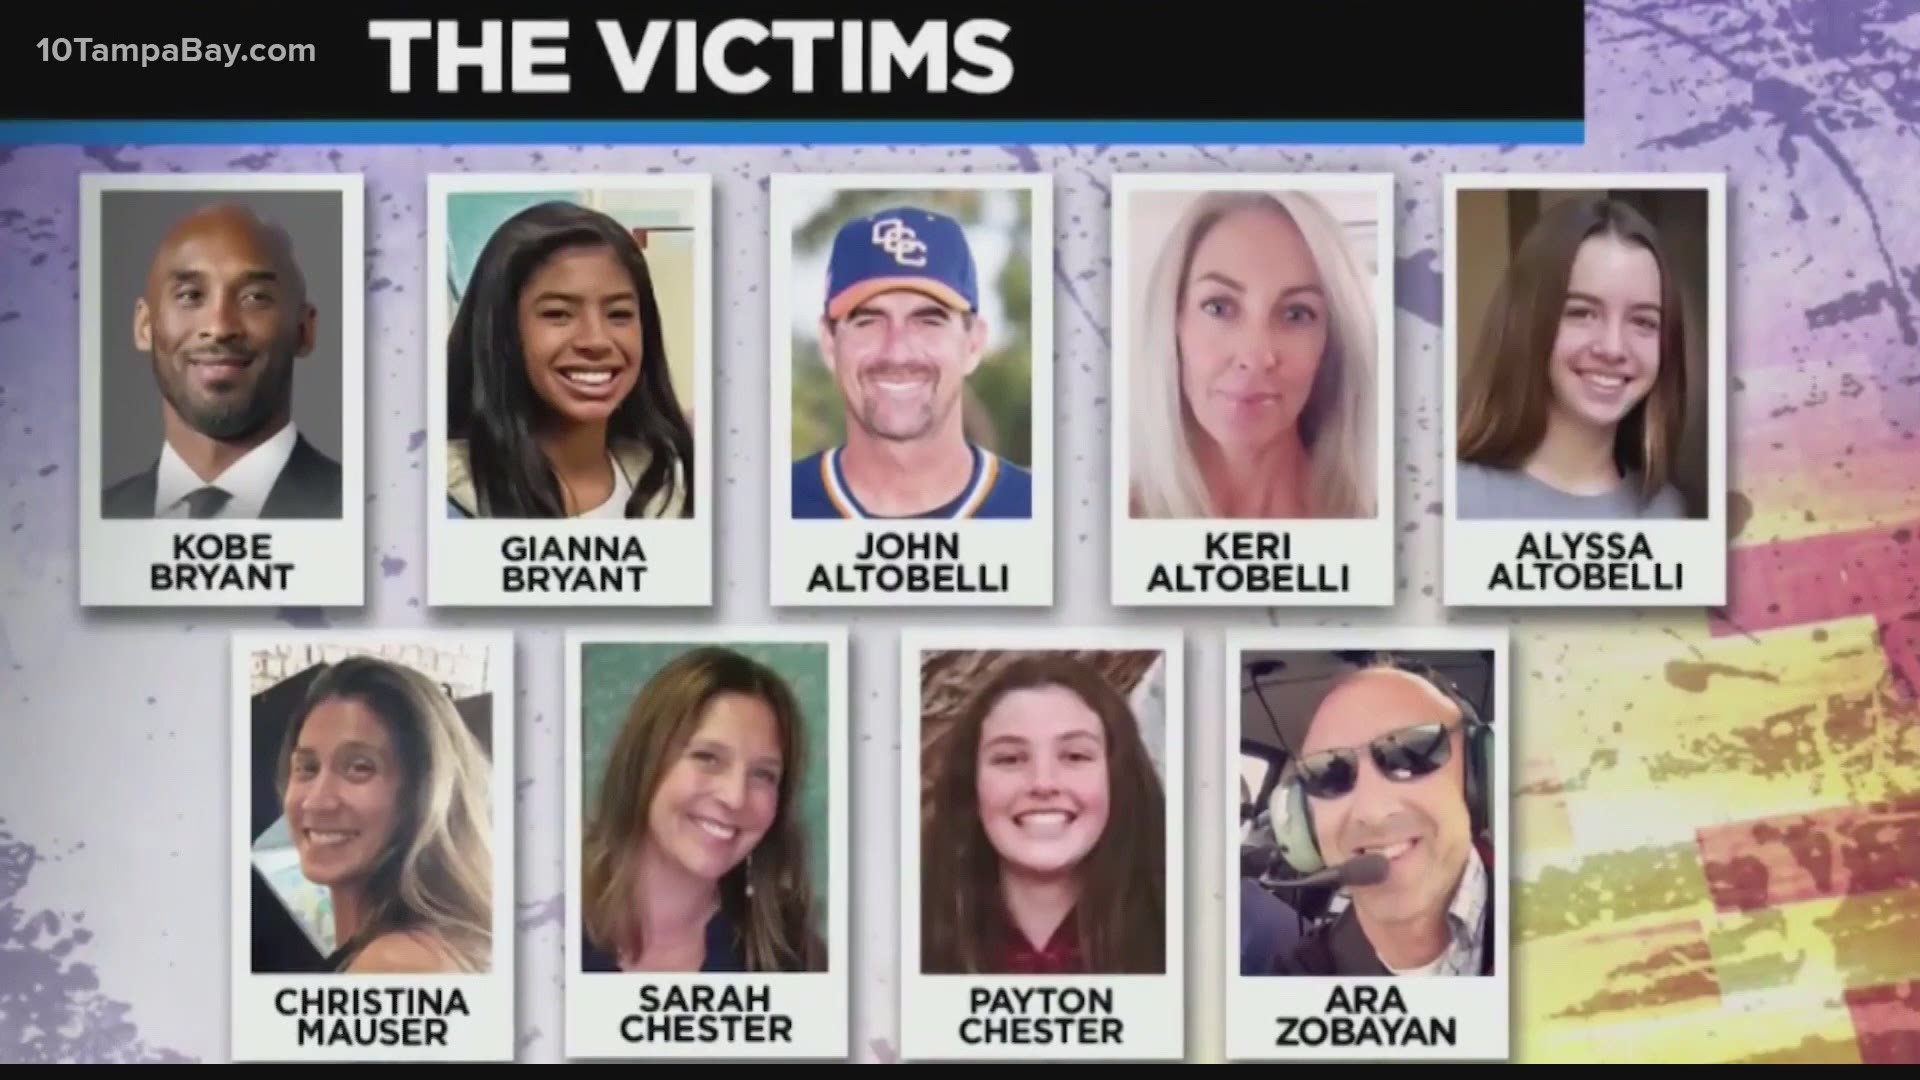 It's been one year since a helicopter crash in california took the life of NBA legend Kobe Bryant, Bryant's daughter and dozens of other victims.